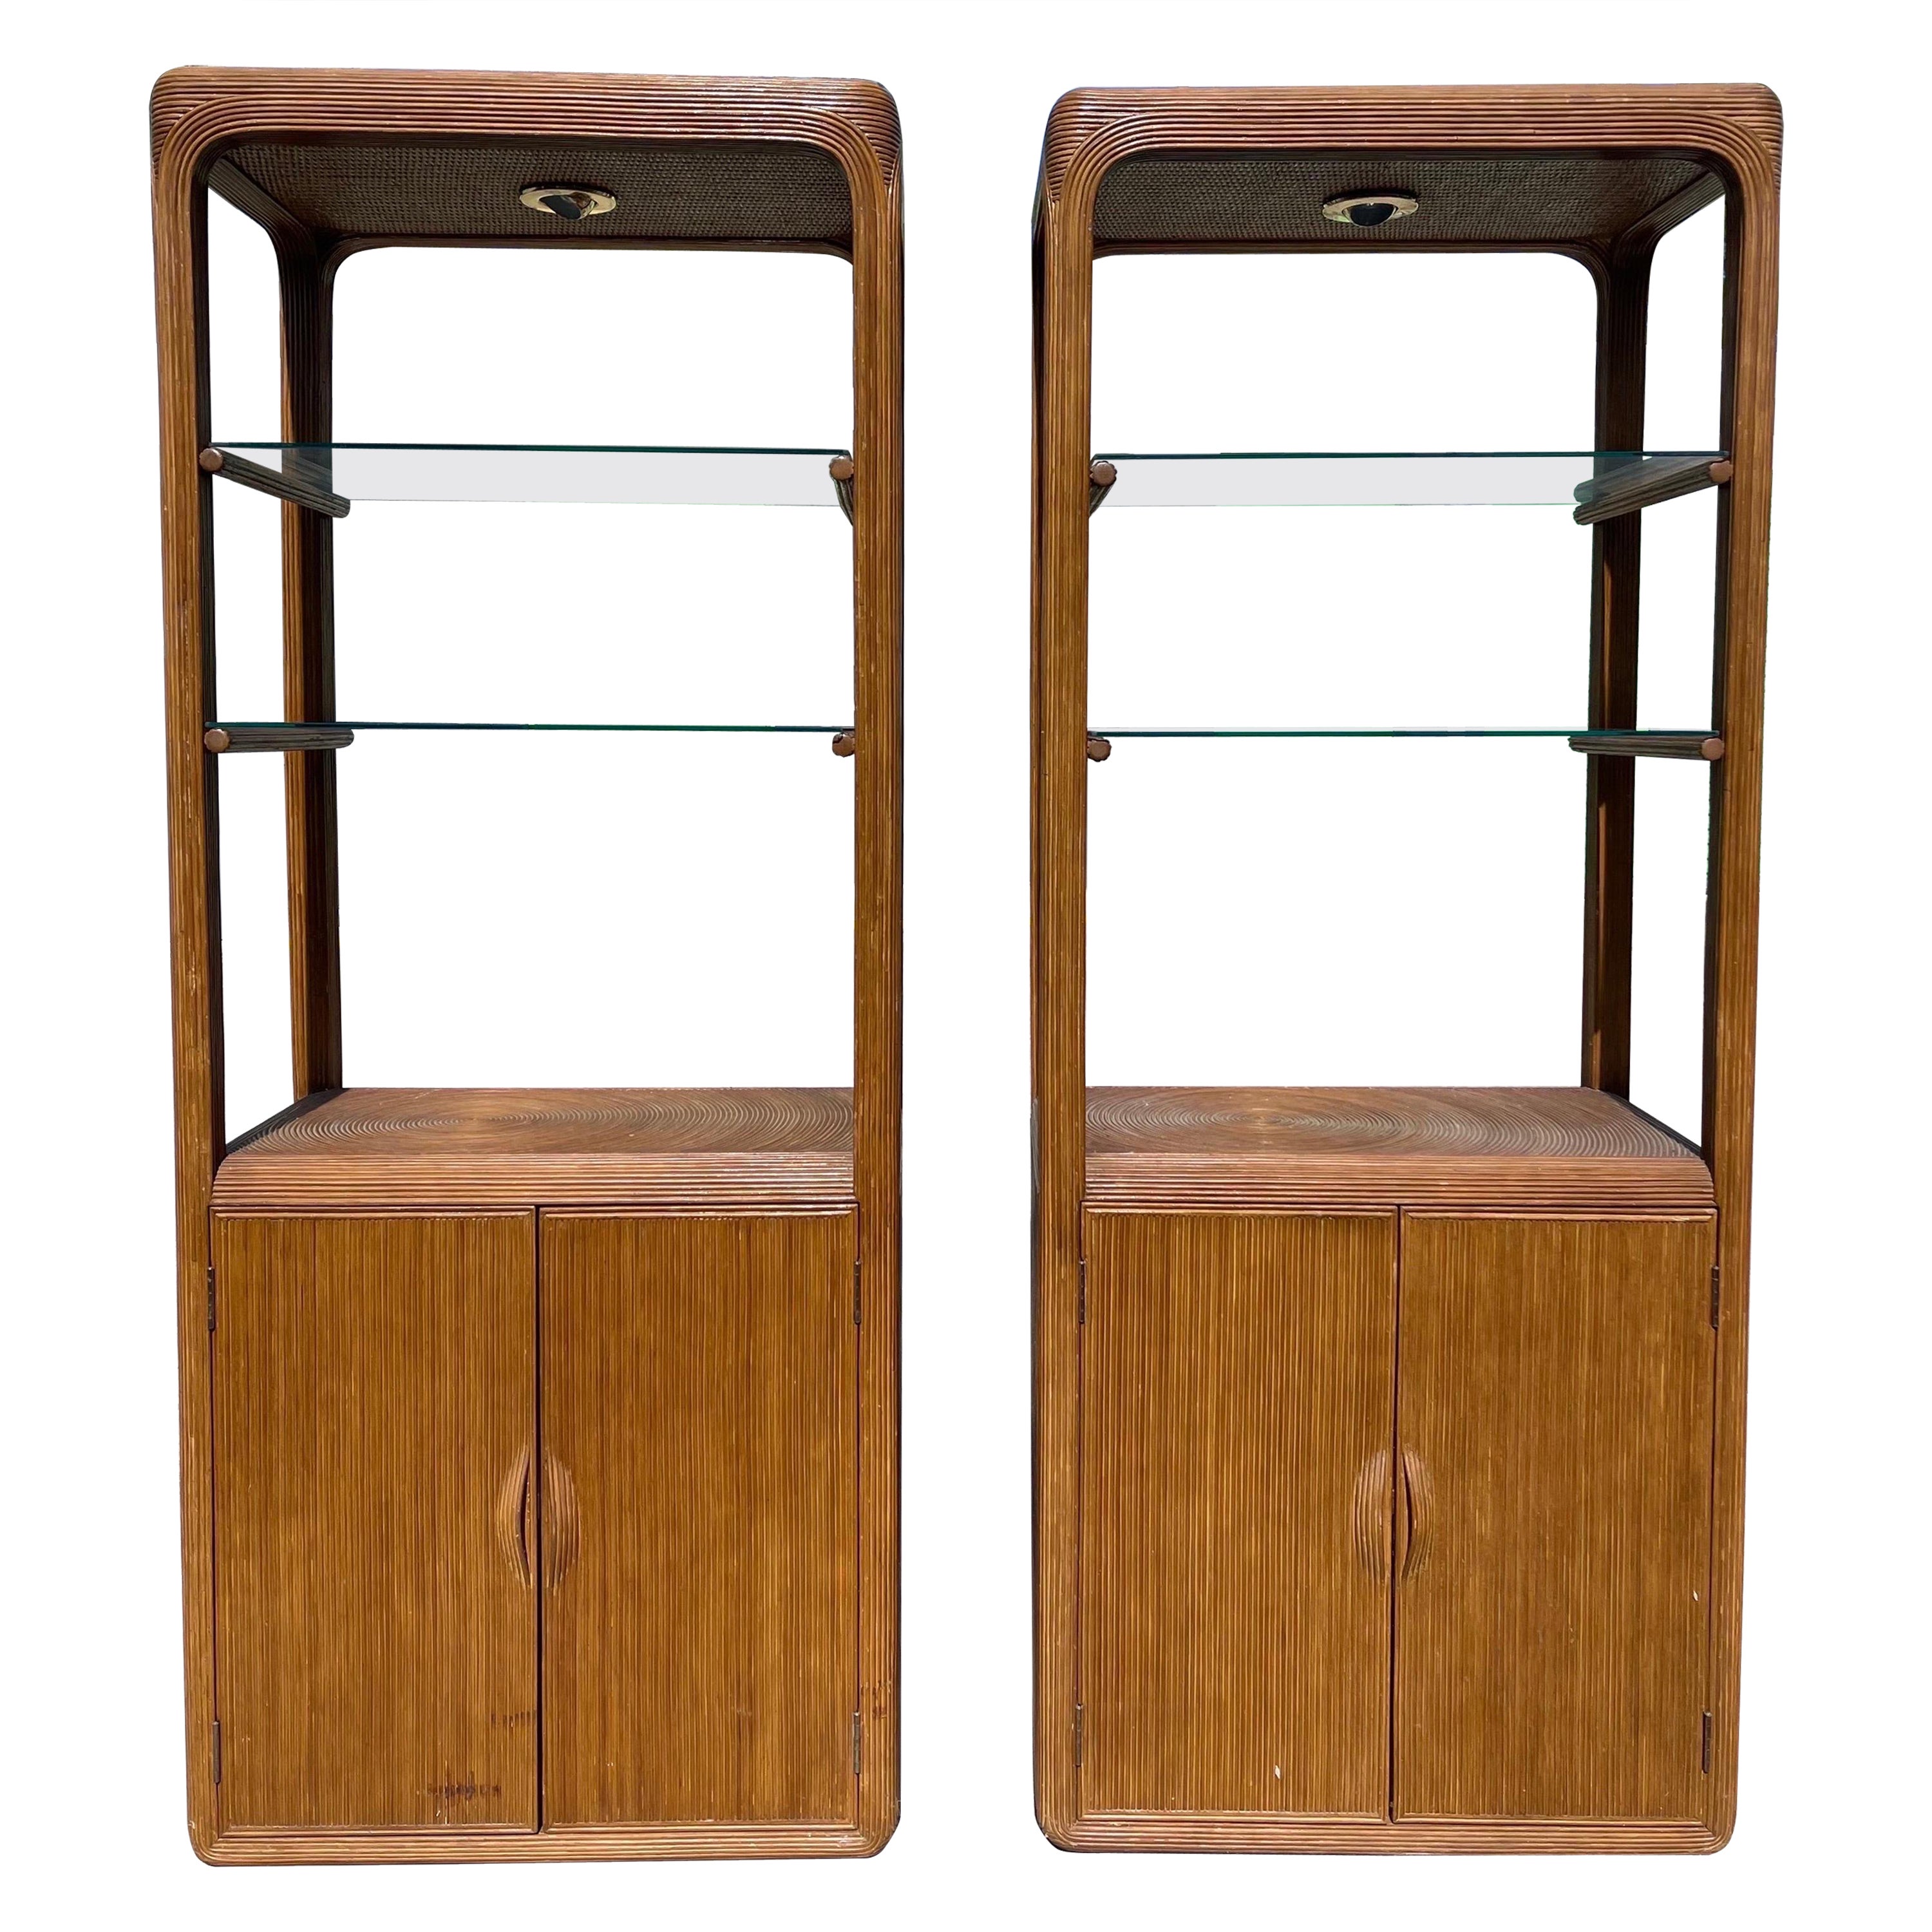 Modernist Pencil Reed Lighted Etagere Shelf Cabinets, a Pair For Sale